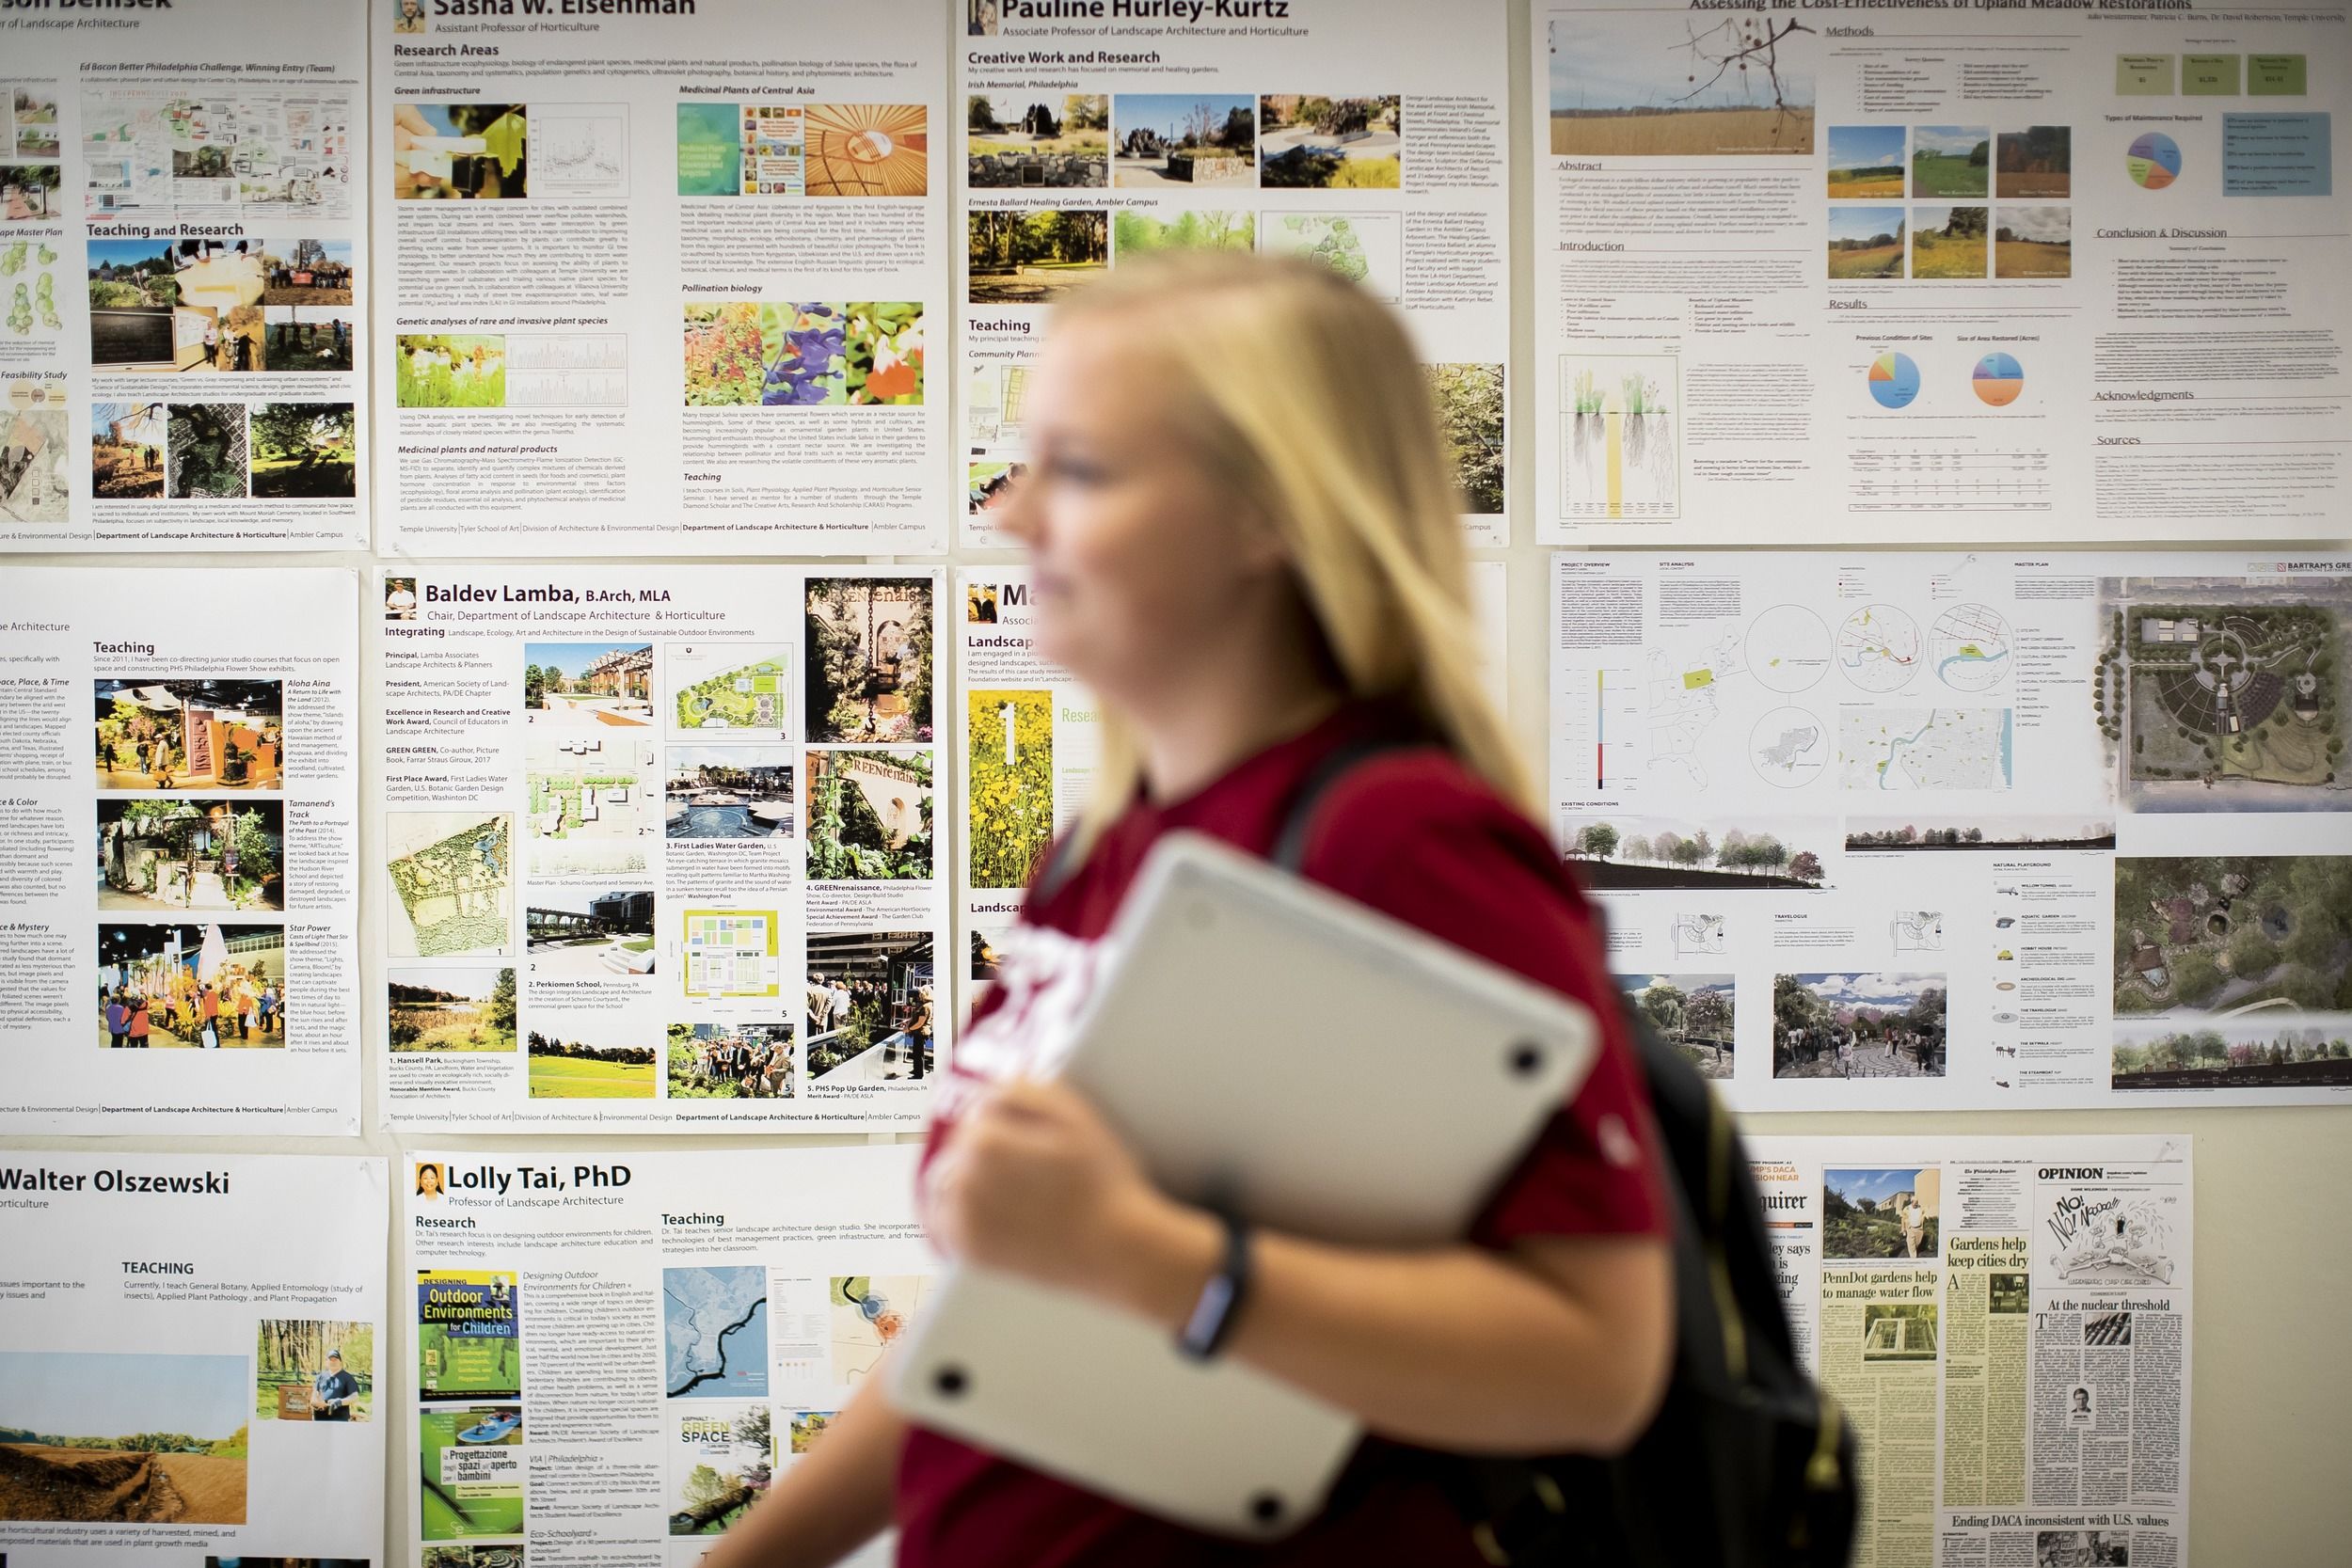 A student rushes past a bulletin board filled with academic posters.